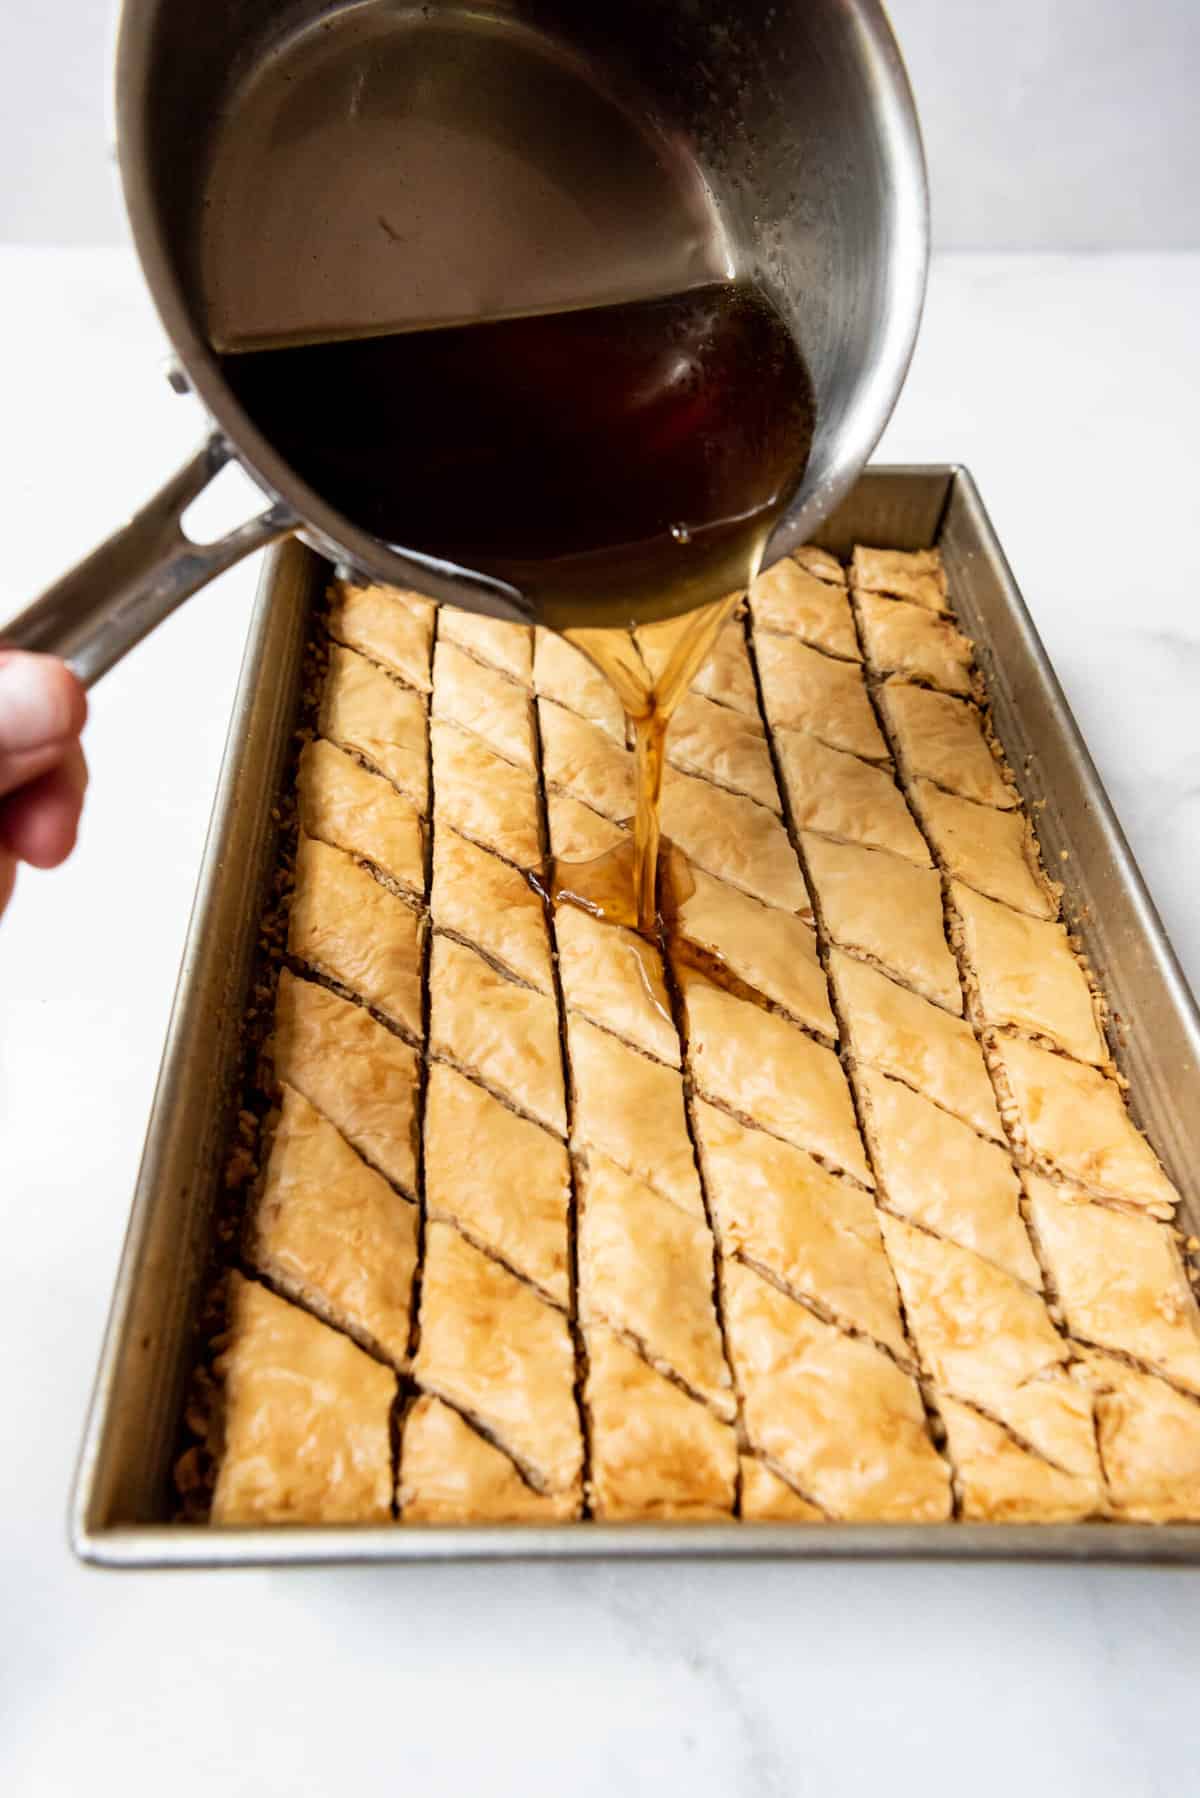 Pouring cooled syrup over hot baklava in a baking dish to soak.